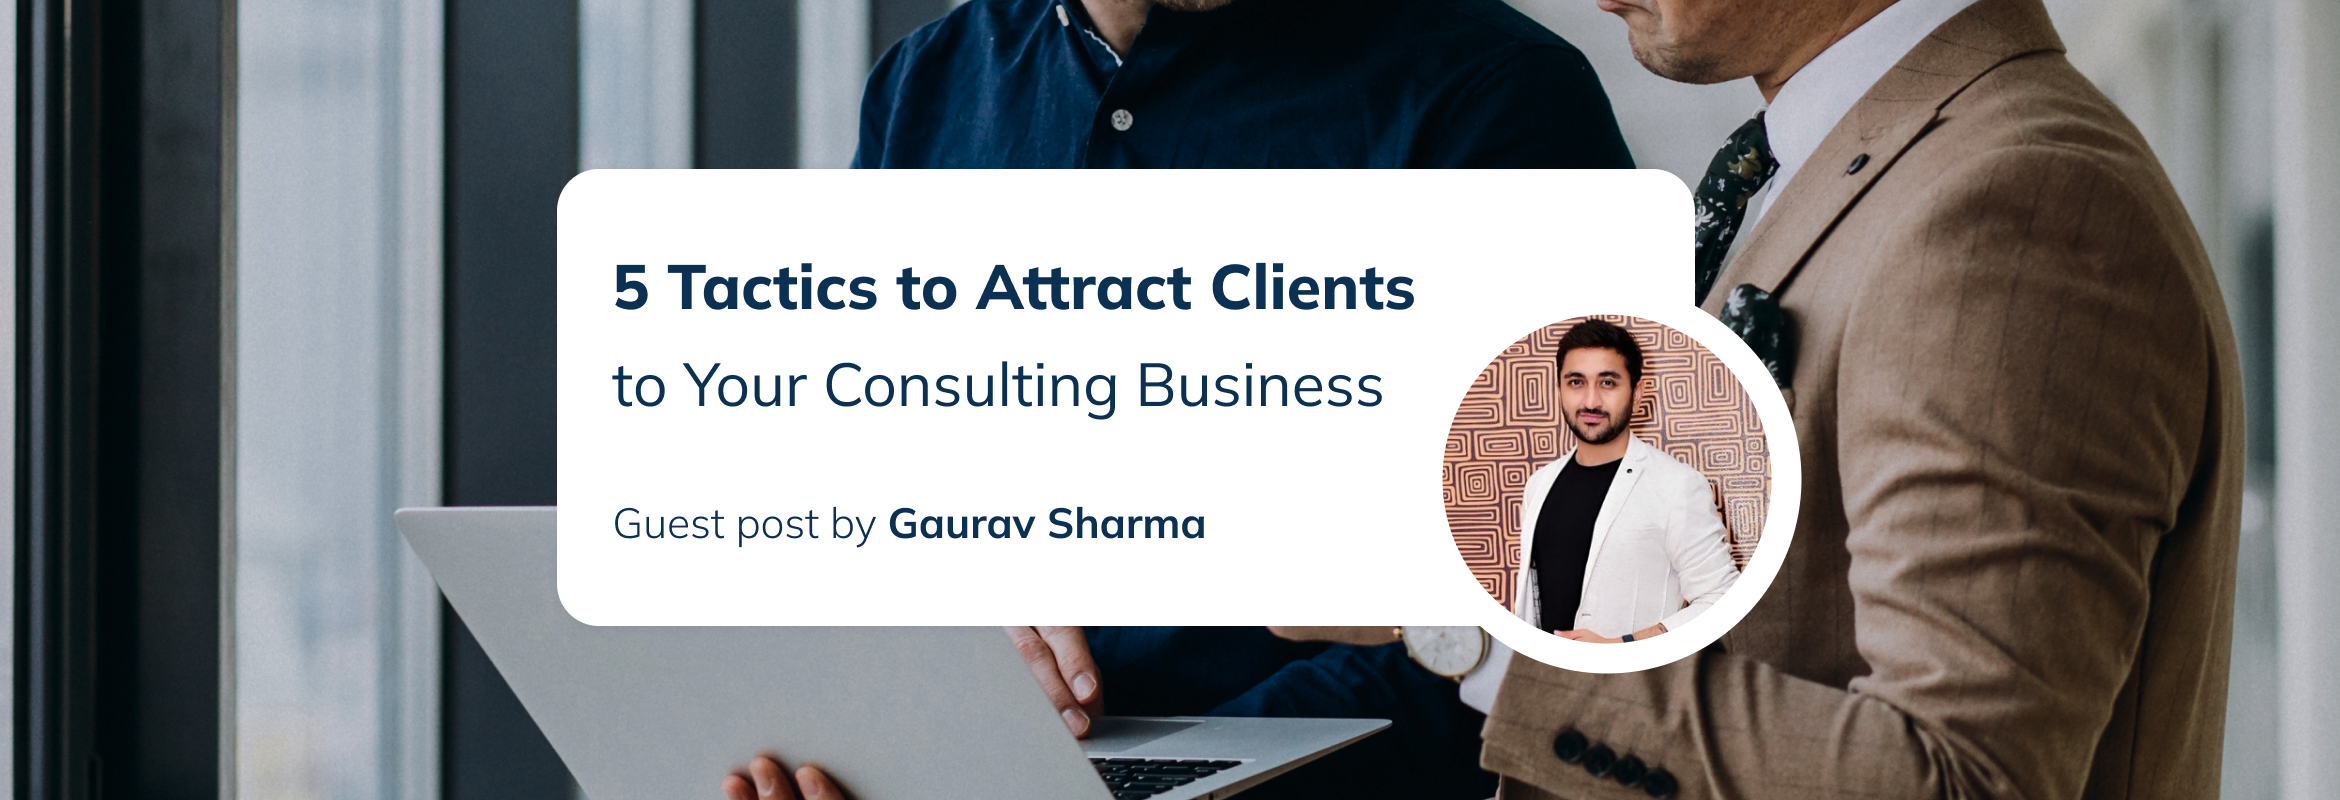 Attract Clients to Your Consulting Business